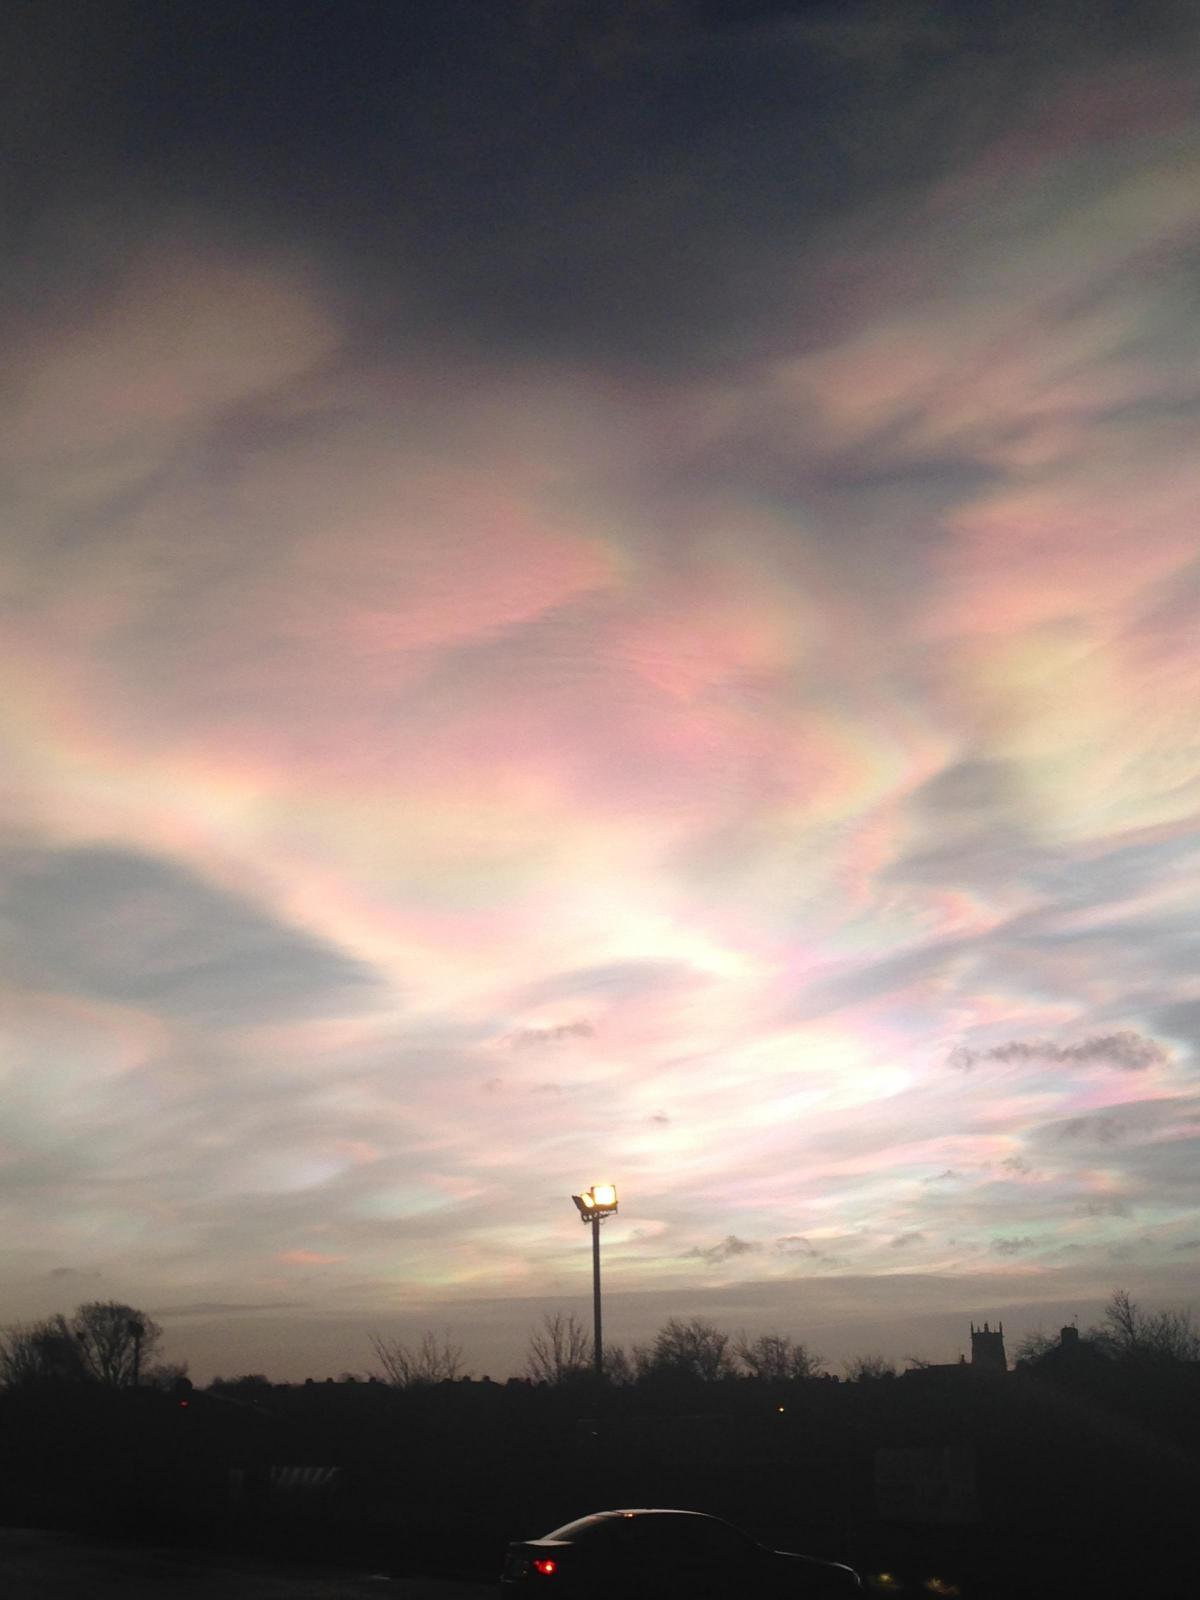 Josie Mead's picture of clouds over Malton